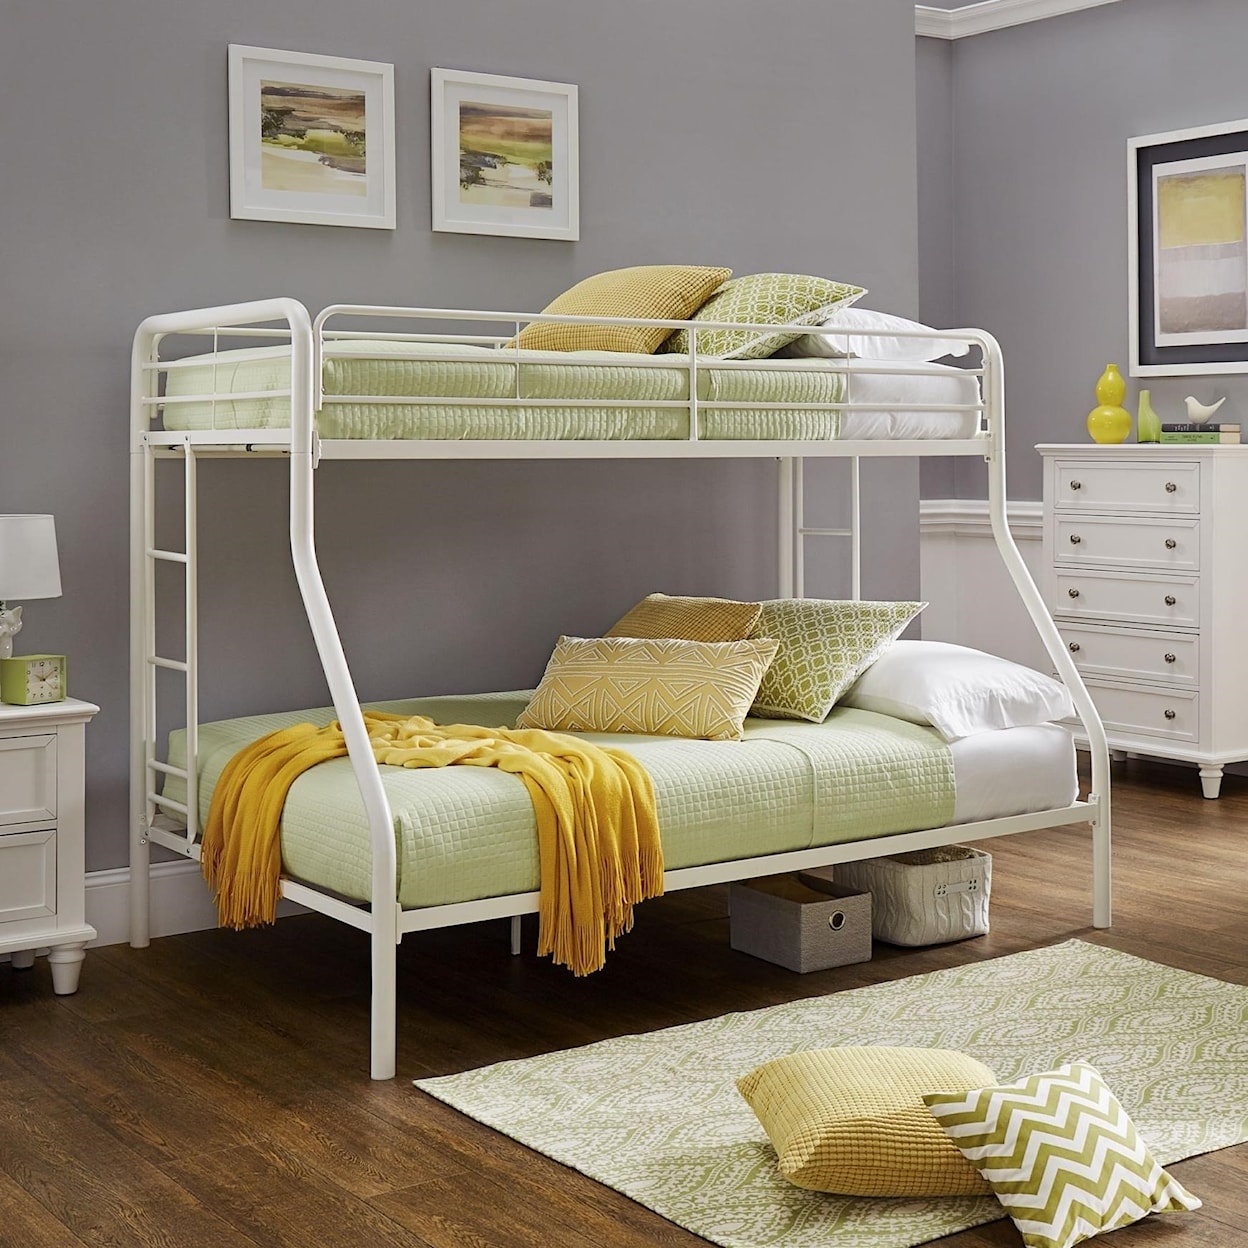 Homelegance 339TF Twin over Full Bunk Bed